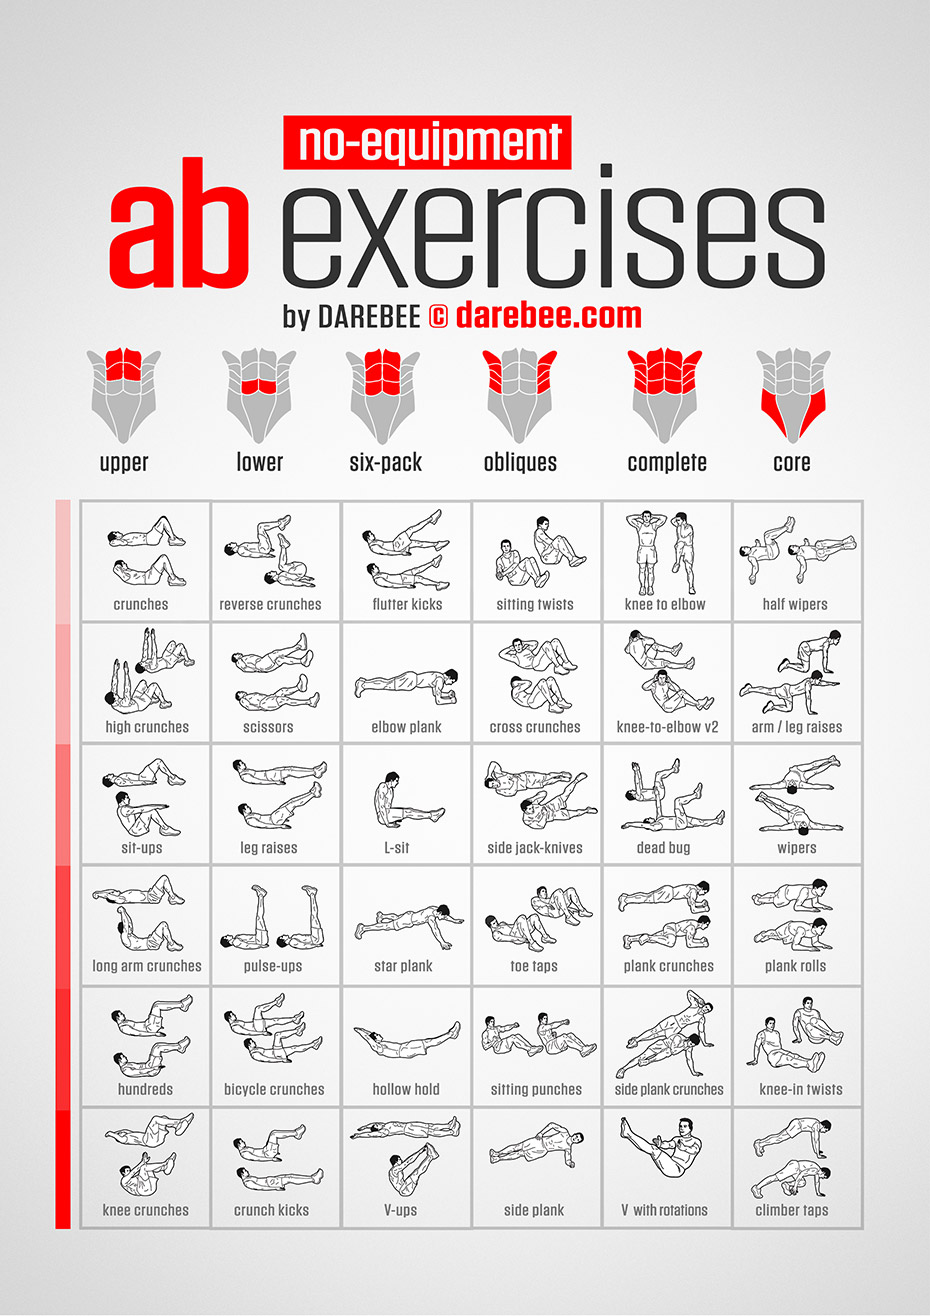 Quick Chart to "no equipment" ab exercises